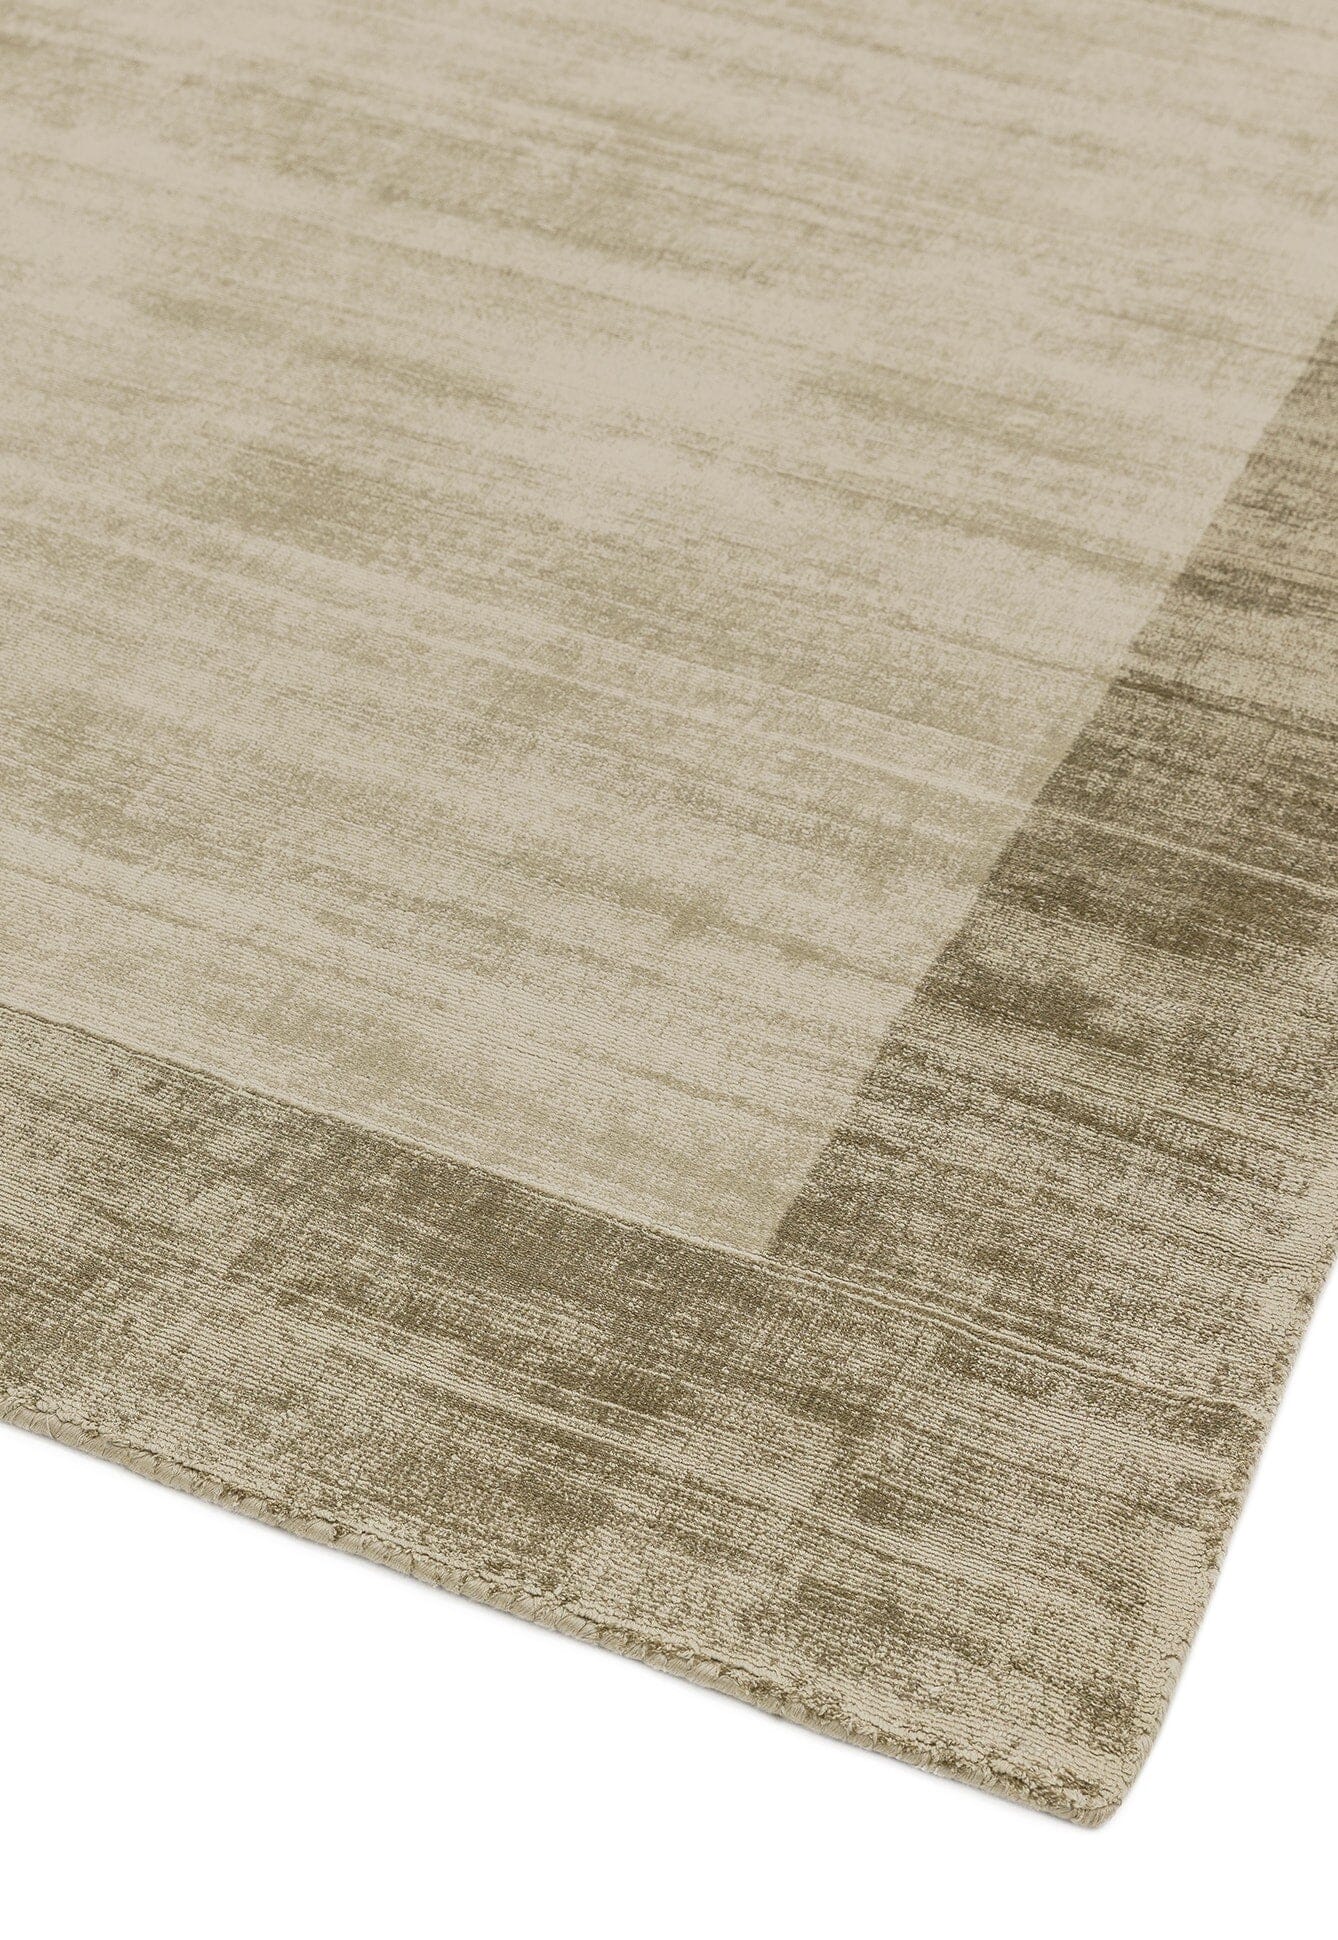  Asiatic Carpets-Asiatic Carpets Blade Hand Woven Rug Smoke Putty - 160 x 160cm-Grey, Silver 589 